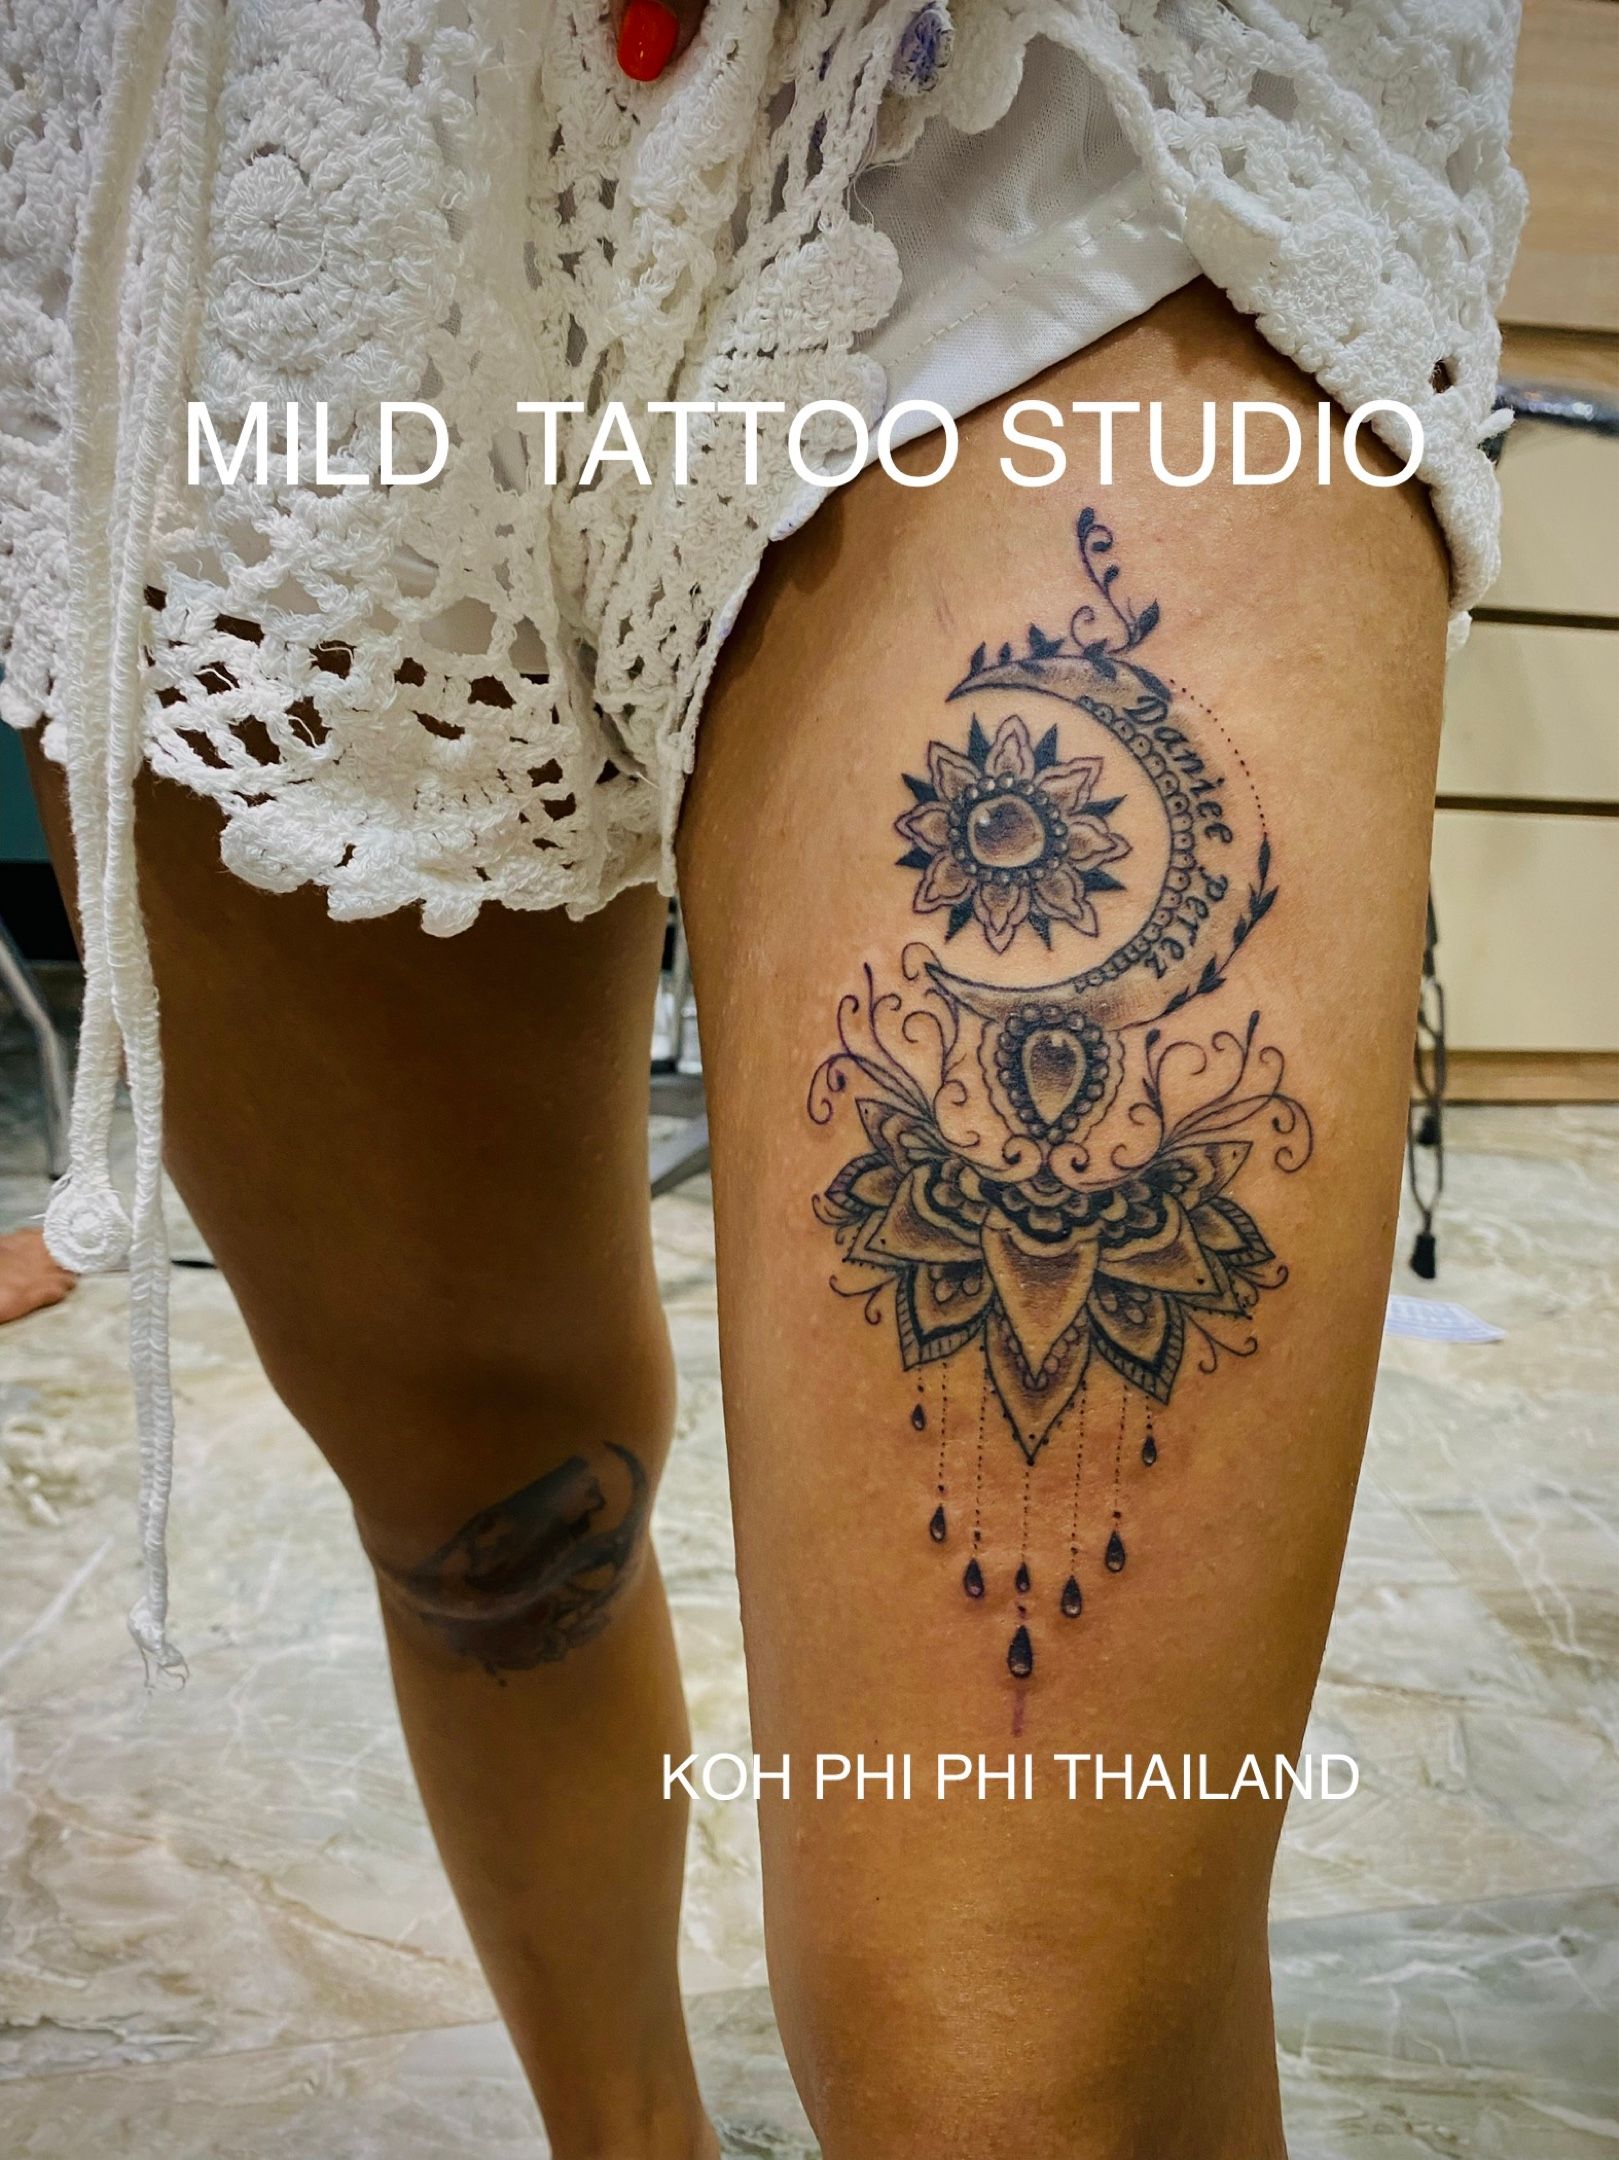 Tattoo uploaded by Mild tattoo studio at phi phi island • #mandala  #mandalatattoo #tattooart #tattooartist #bambootattoothailand #traditional  #tattooshop #at #mildtattoostudio #mildtattoophiphi #tattoophiphi  #phiphiisland #thailand #tattoodo #tattooink ...